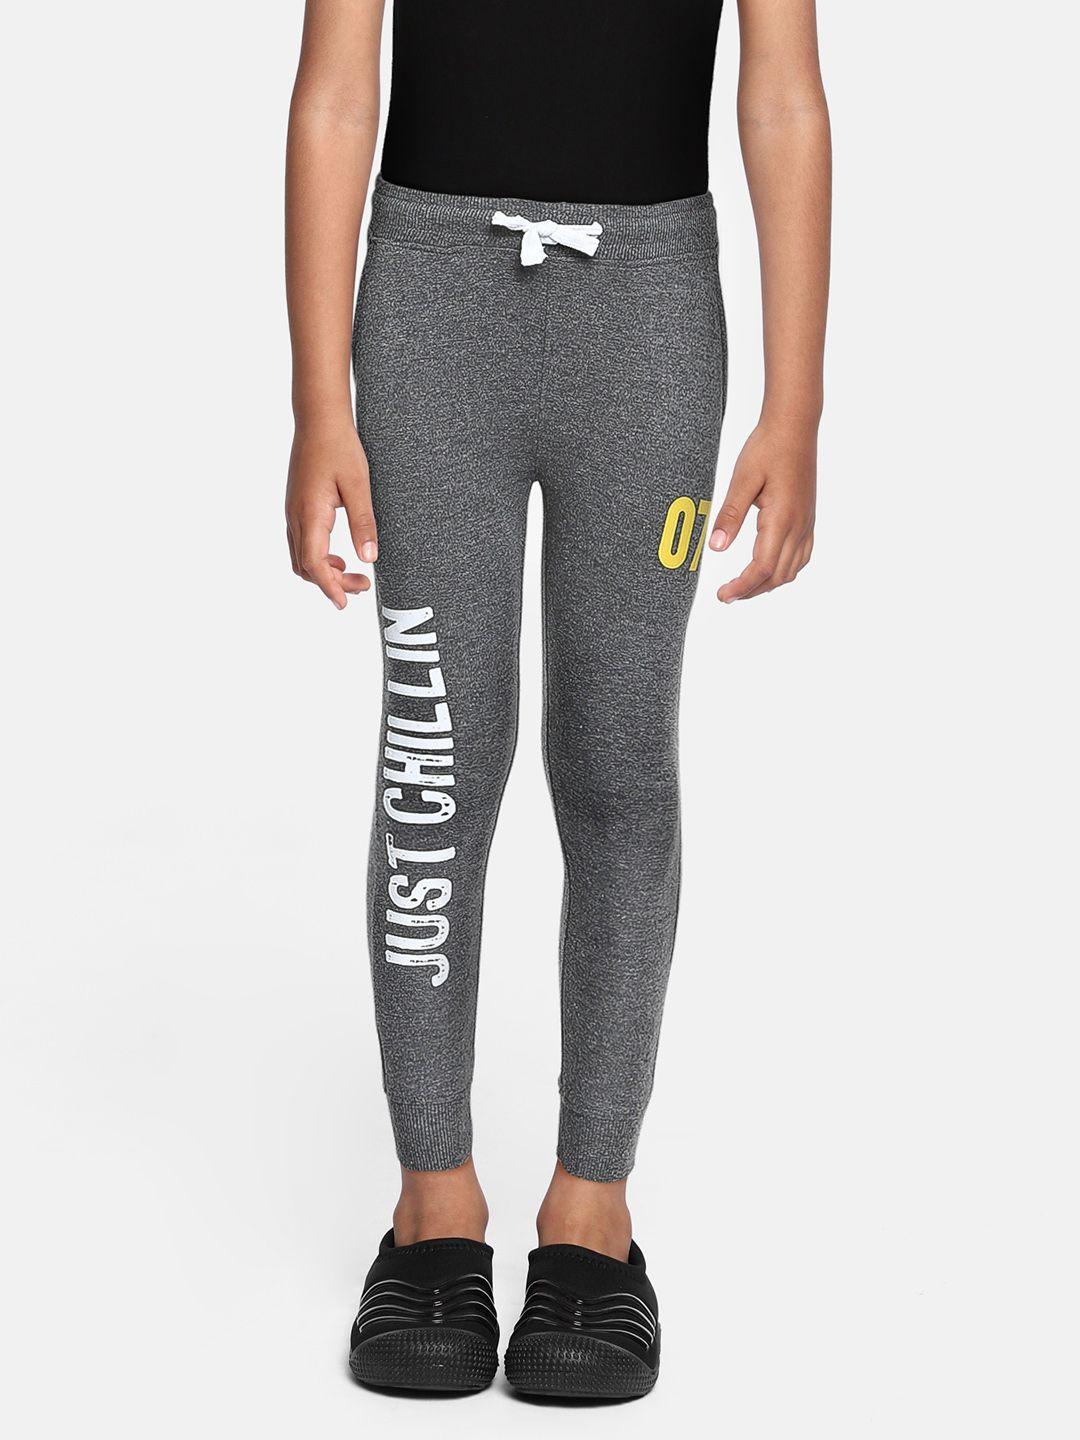 miss & chief kids black solid pure cotton joggers